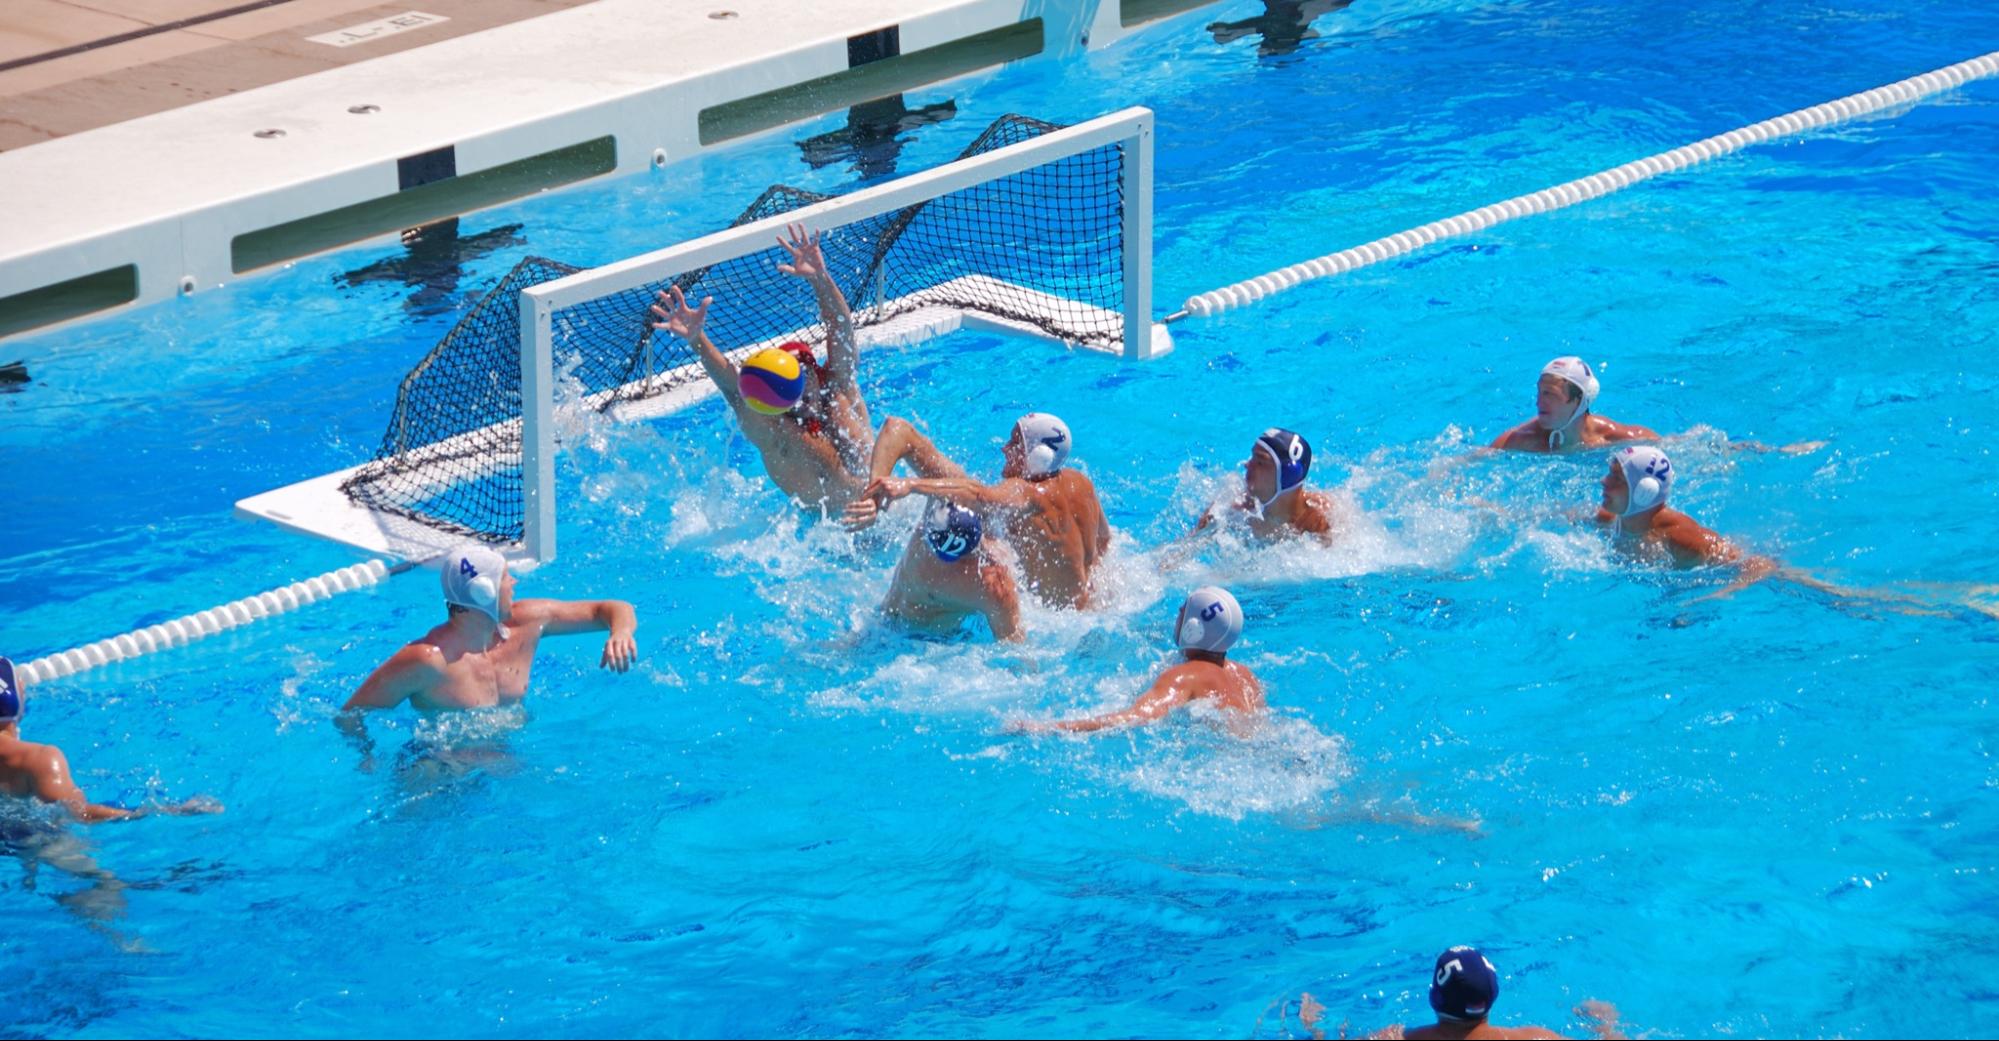 Team playing water polo